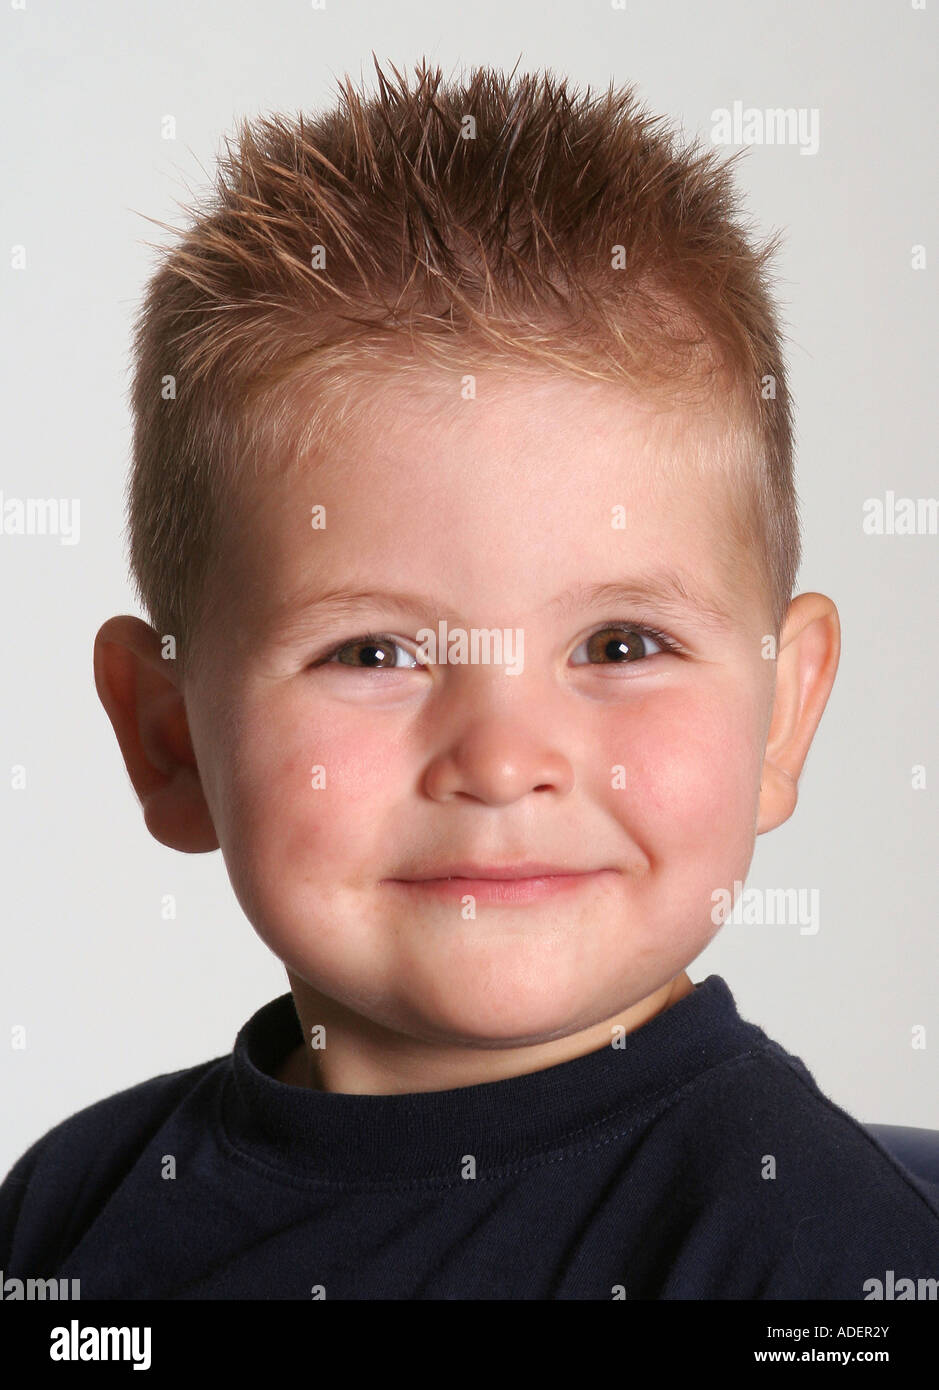 a young boy Stock Photo